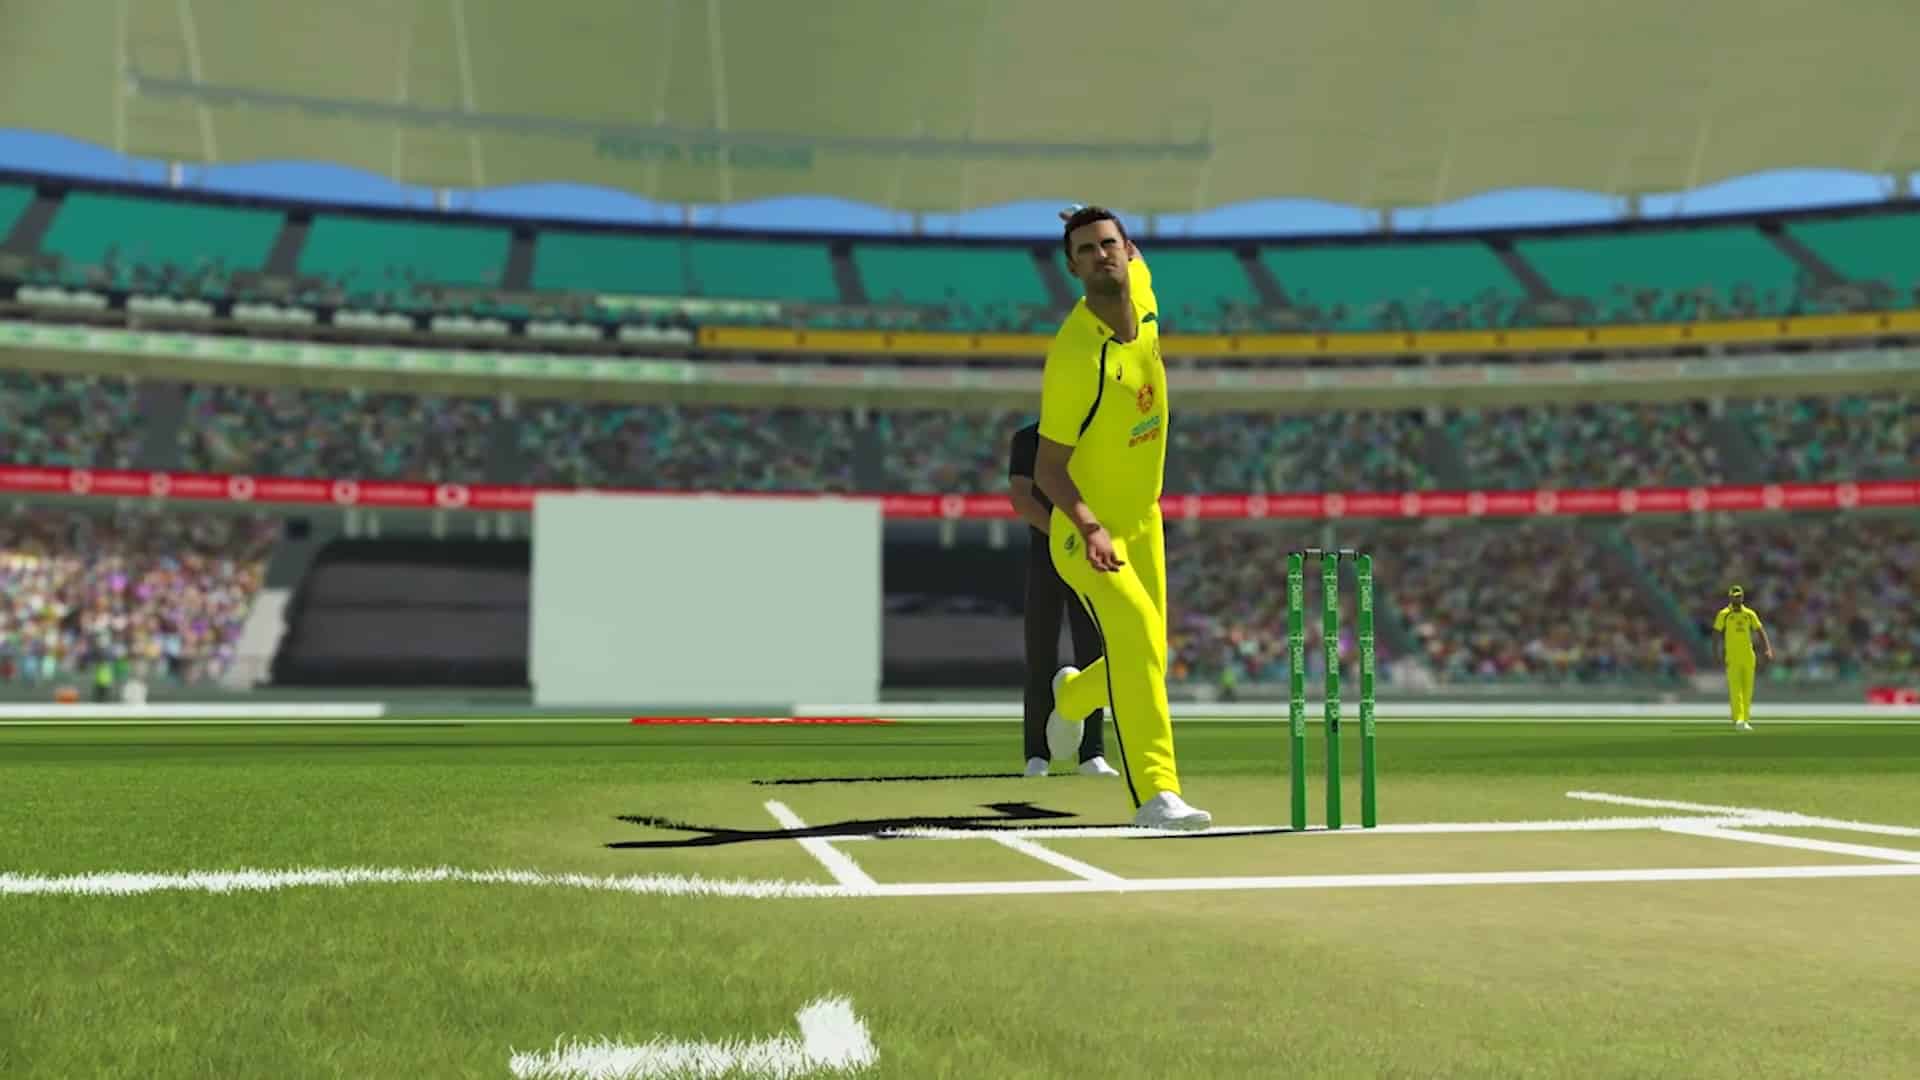 3d cricket games free download full version for windows 7